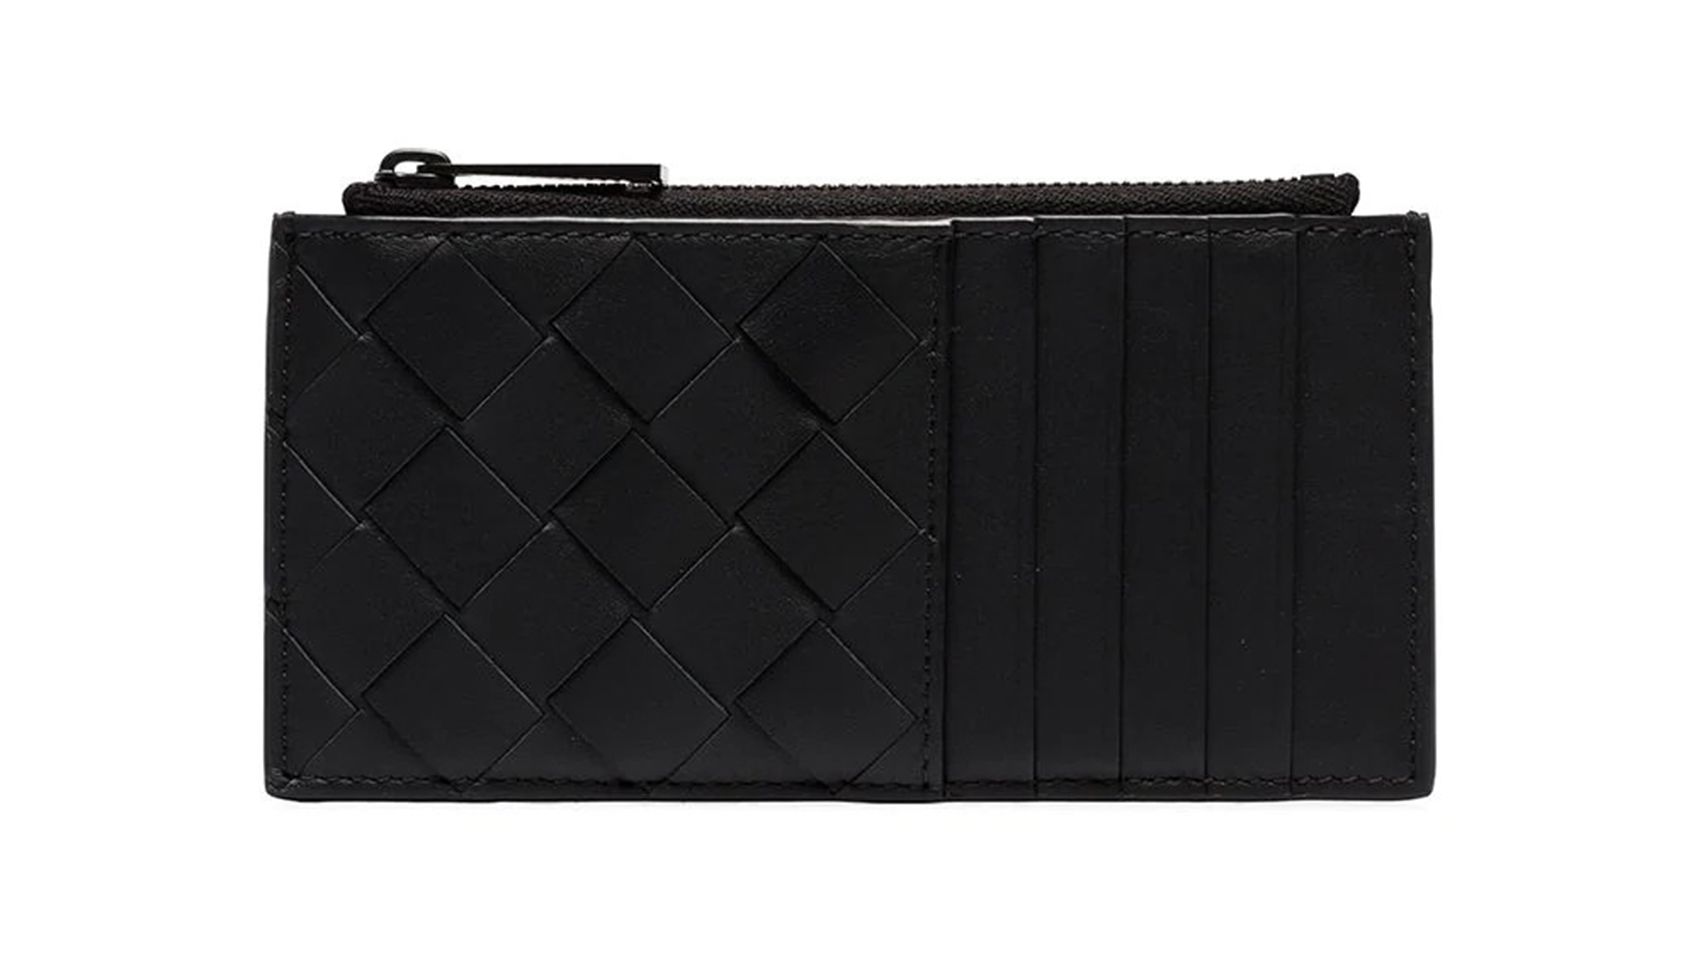 Vintage style Black patterned leather Wallet for women in classy